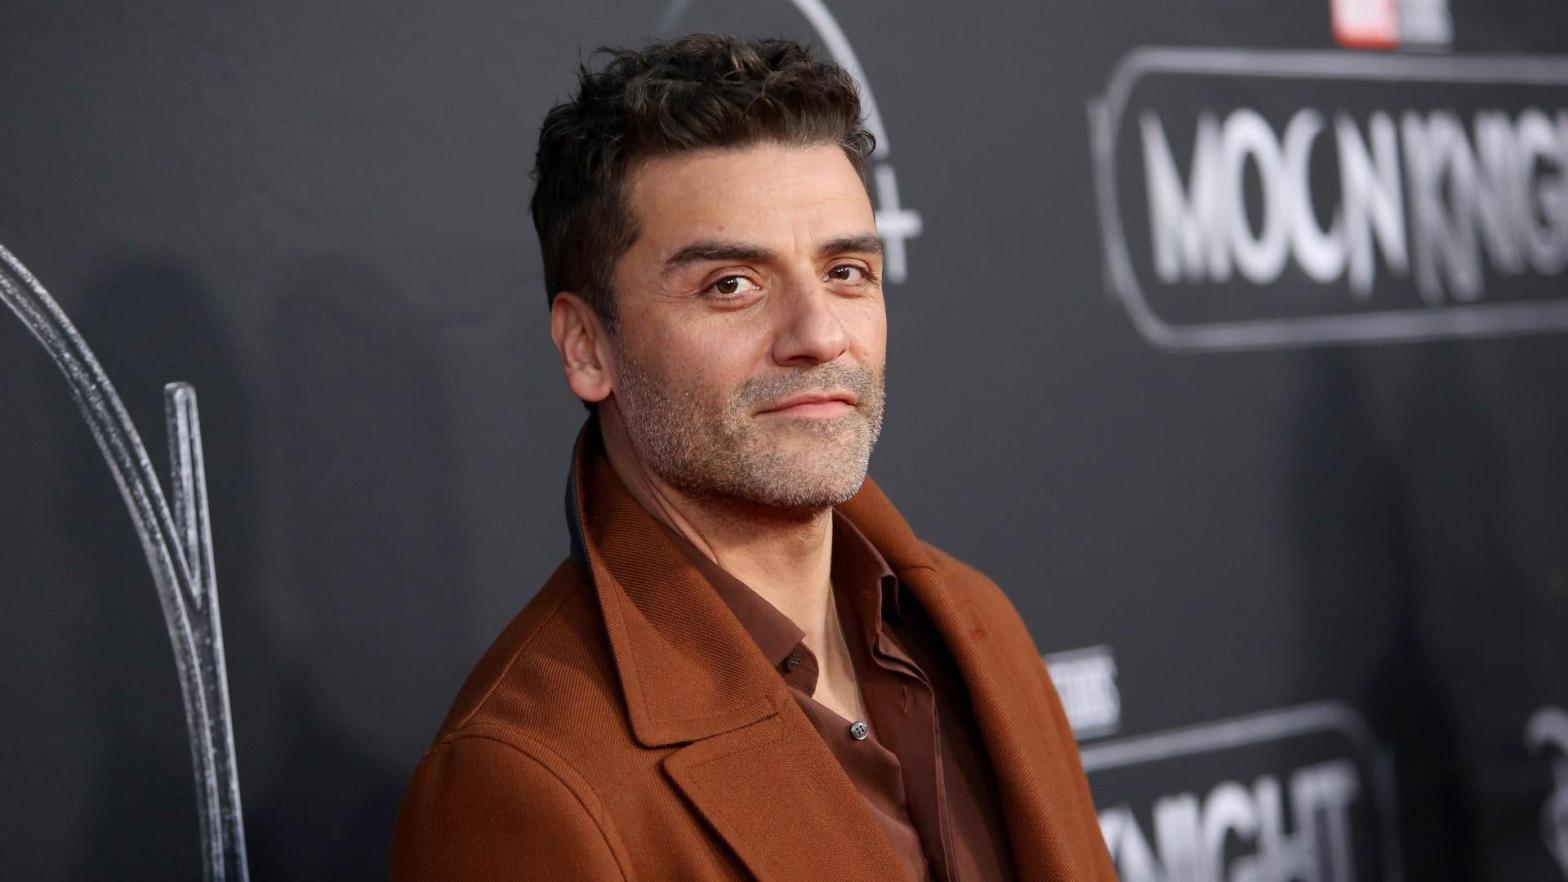 It's Oscar Week. Oscar Isaac, of course. Here, we see him at the premiere of Moon Knight. (Image: Marvel Studios)